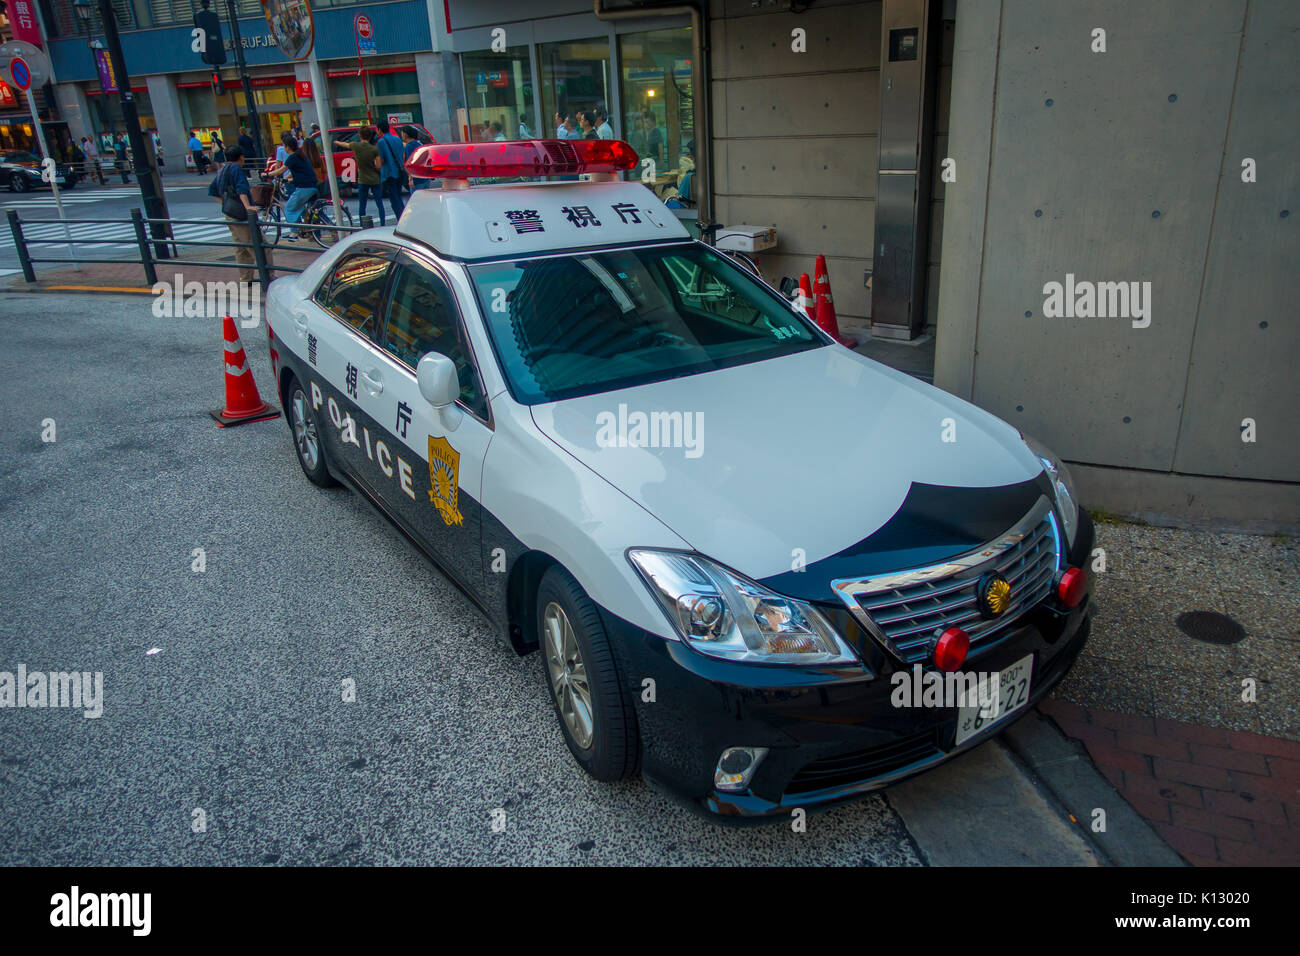 TOKYO, JAPAN JUNE 28 - 2017: Tokyo Metropolitan Police Department car parked in front of the central station of Tokyo Stock Photo